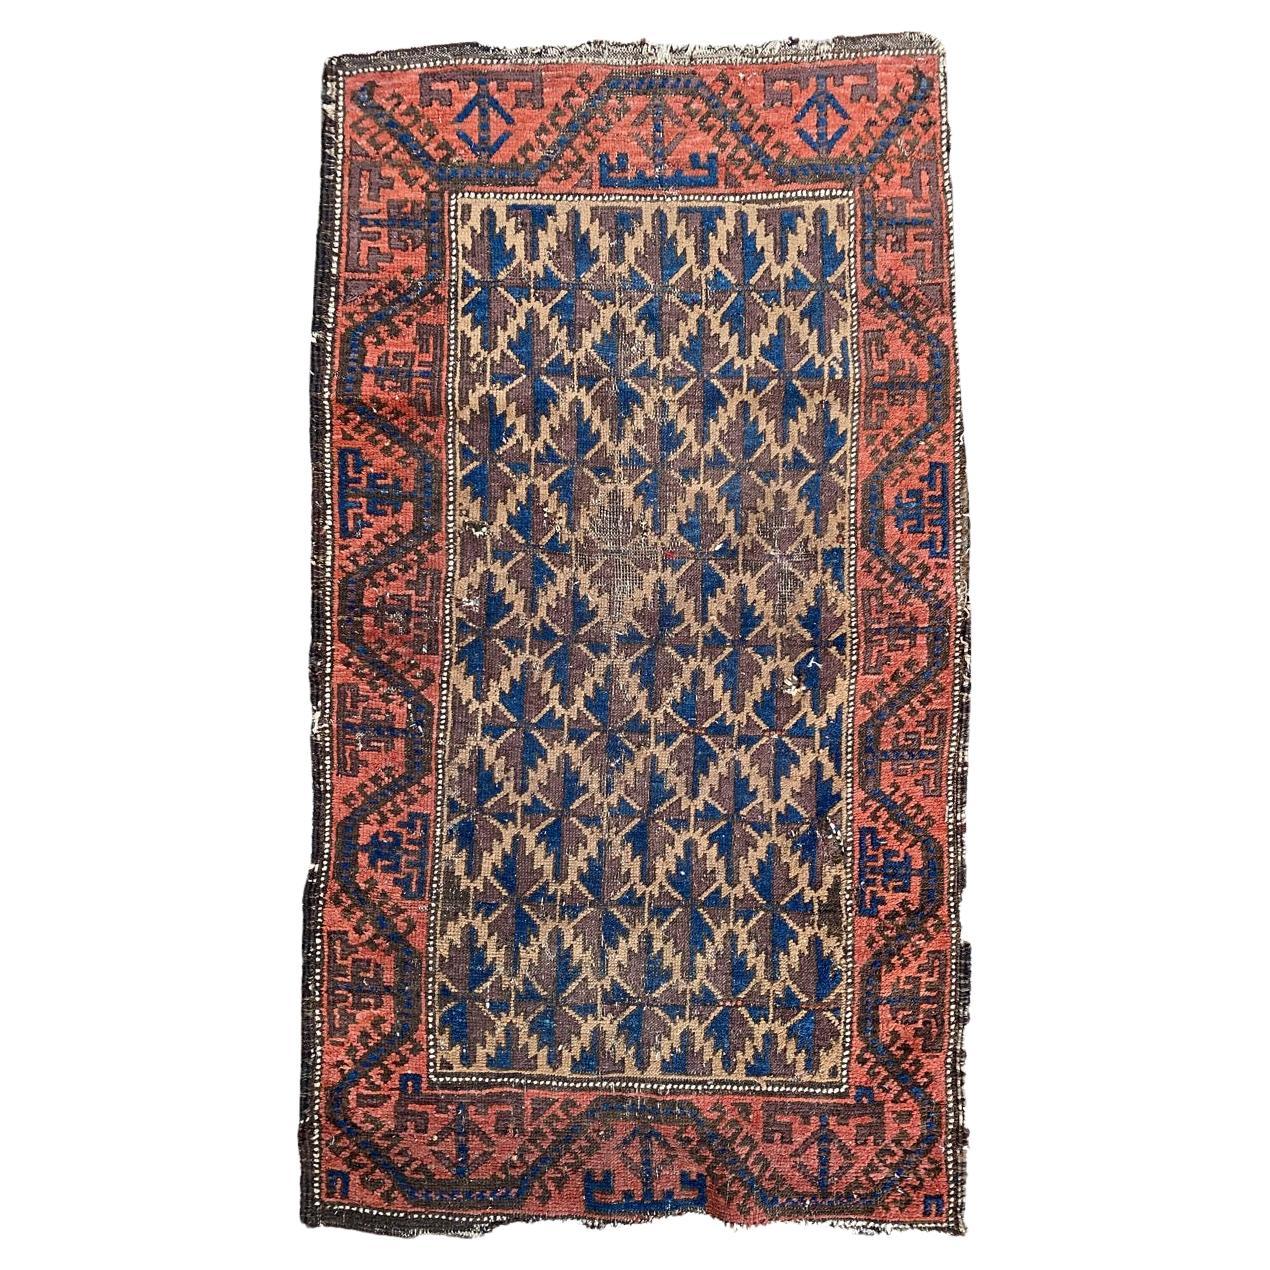 Bobyrug’s Nice Little Antique Distressed Baluch Rug For Sale